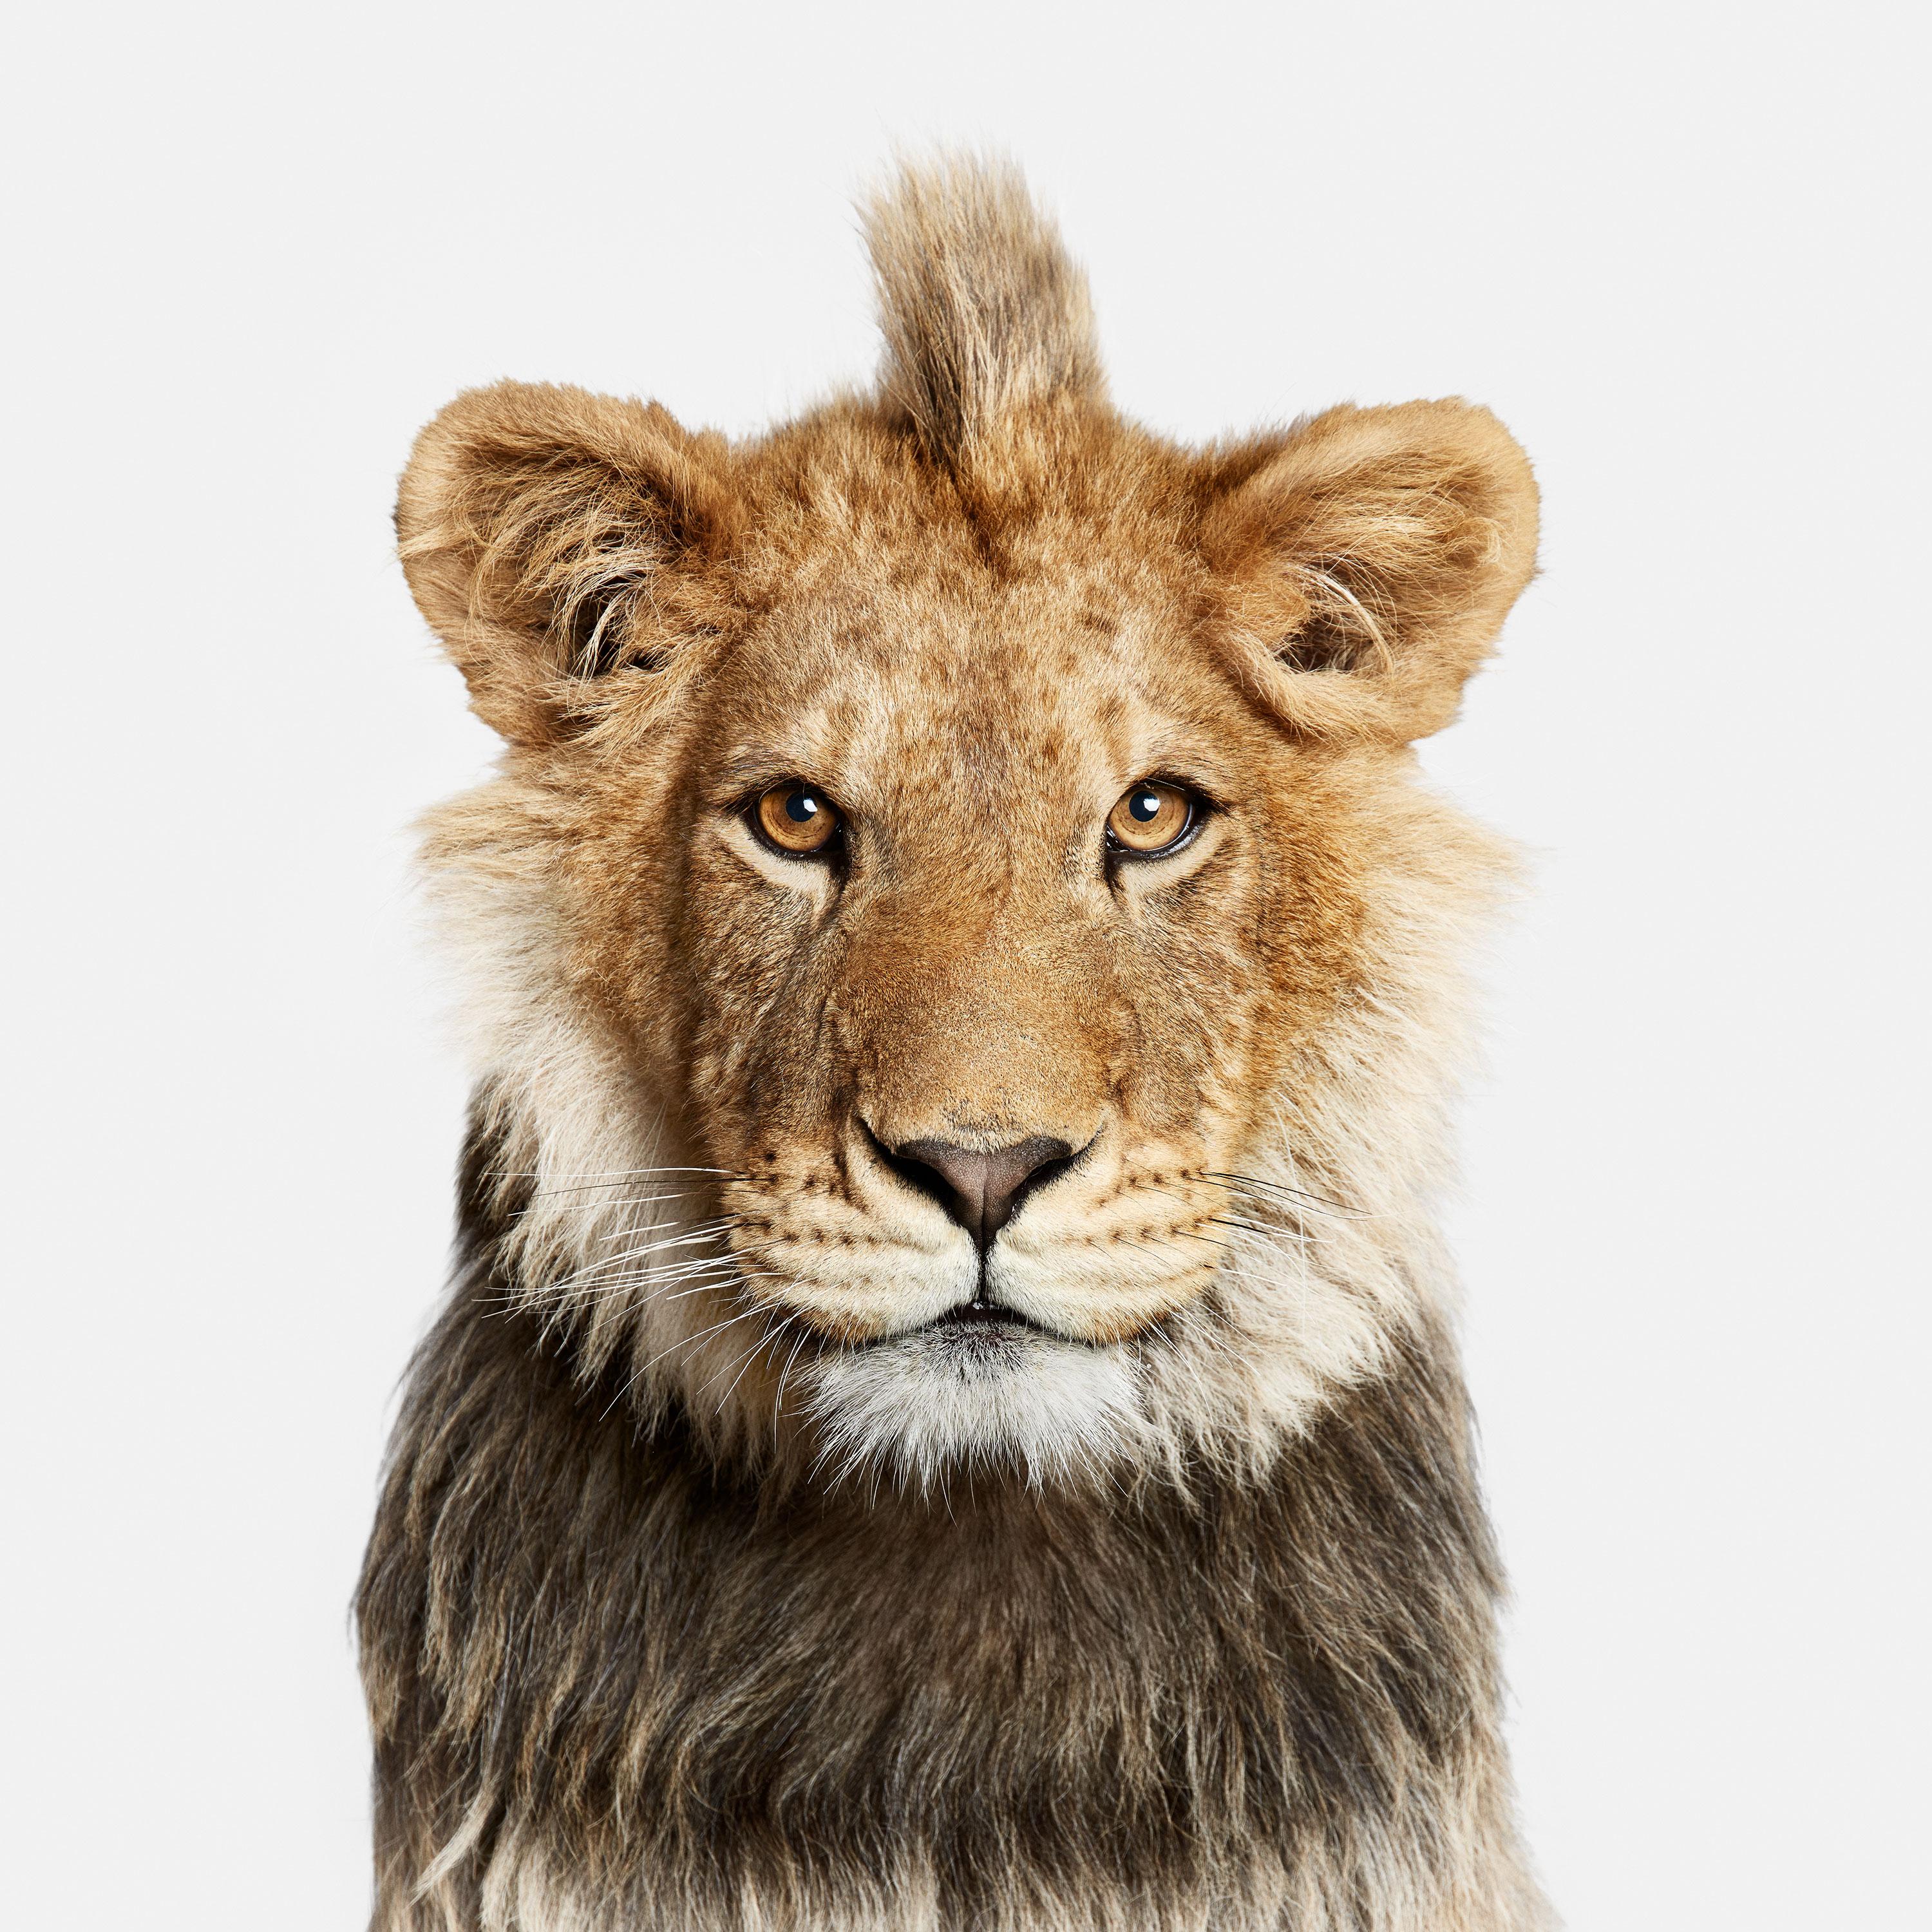 Randal Ford - Young Lion, Photography 2018, Printed After